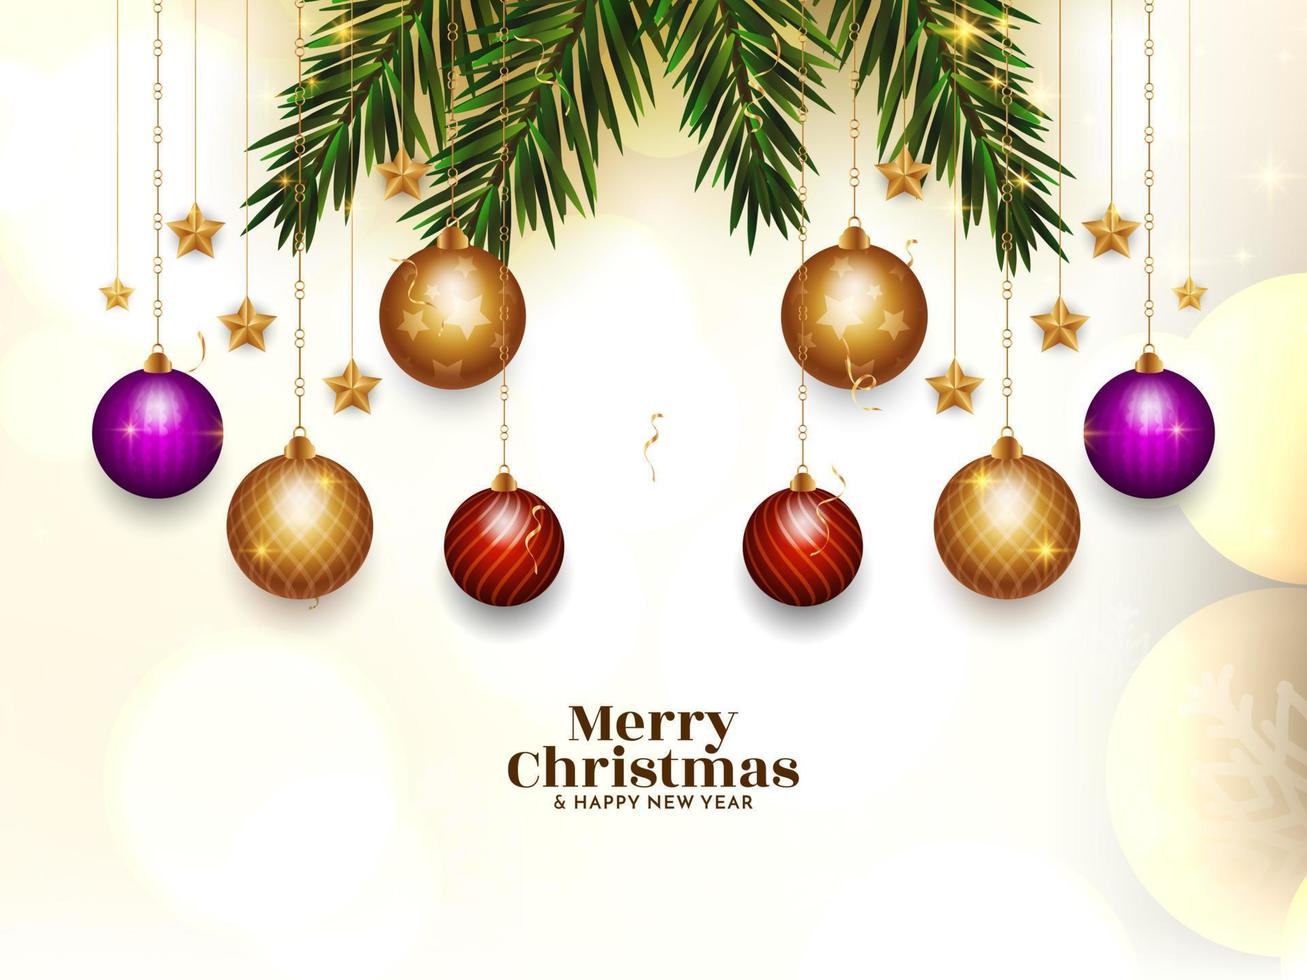 Merry Christmas festival background with decorative stylish hanging balls design vector